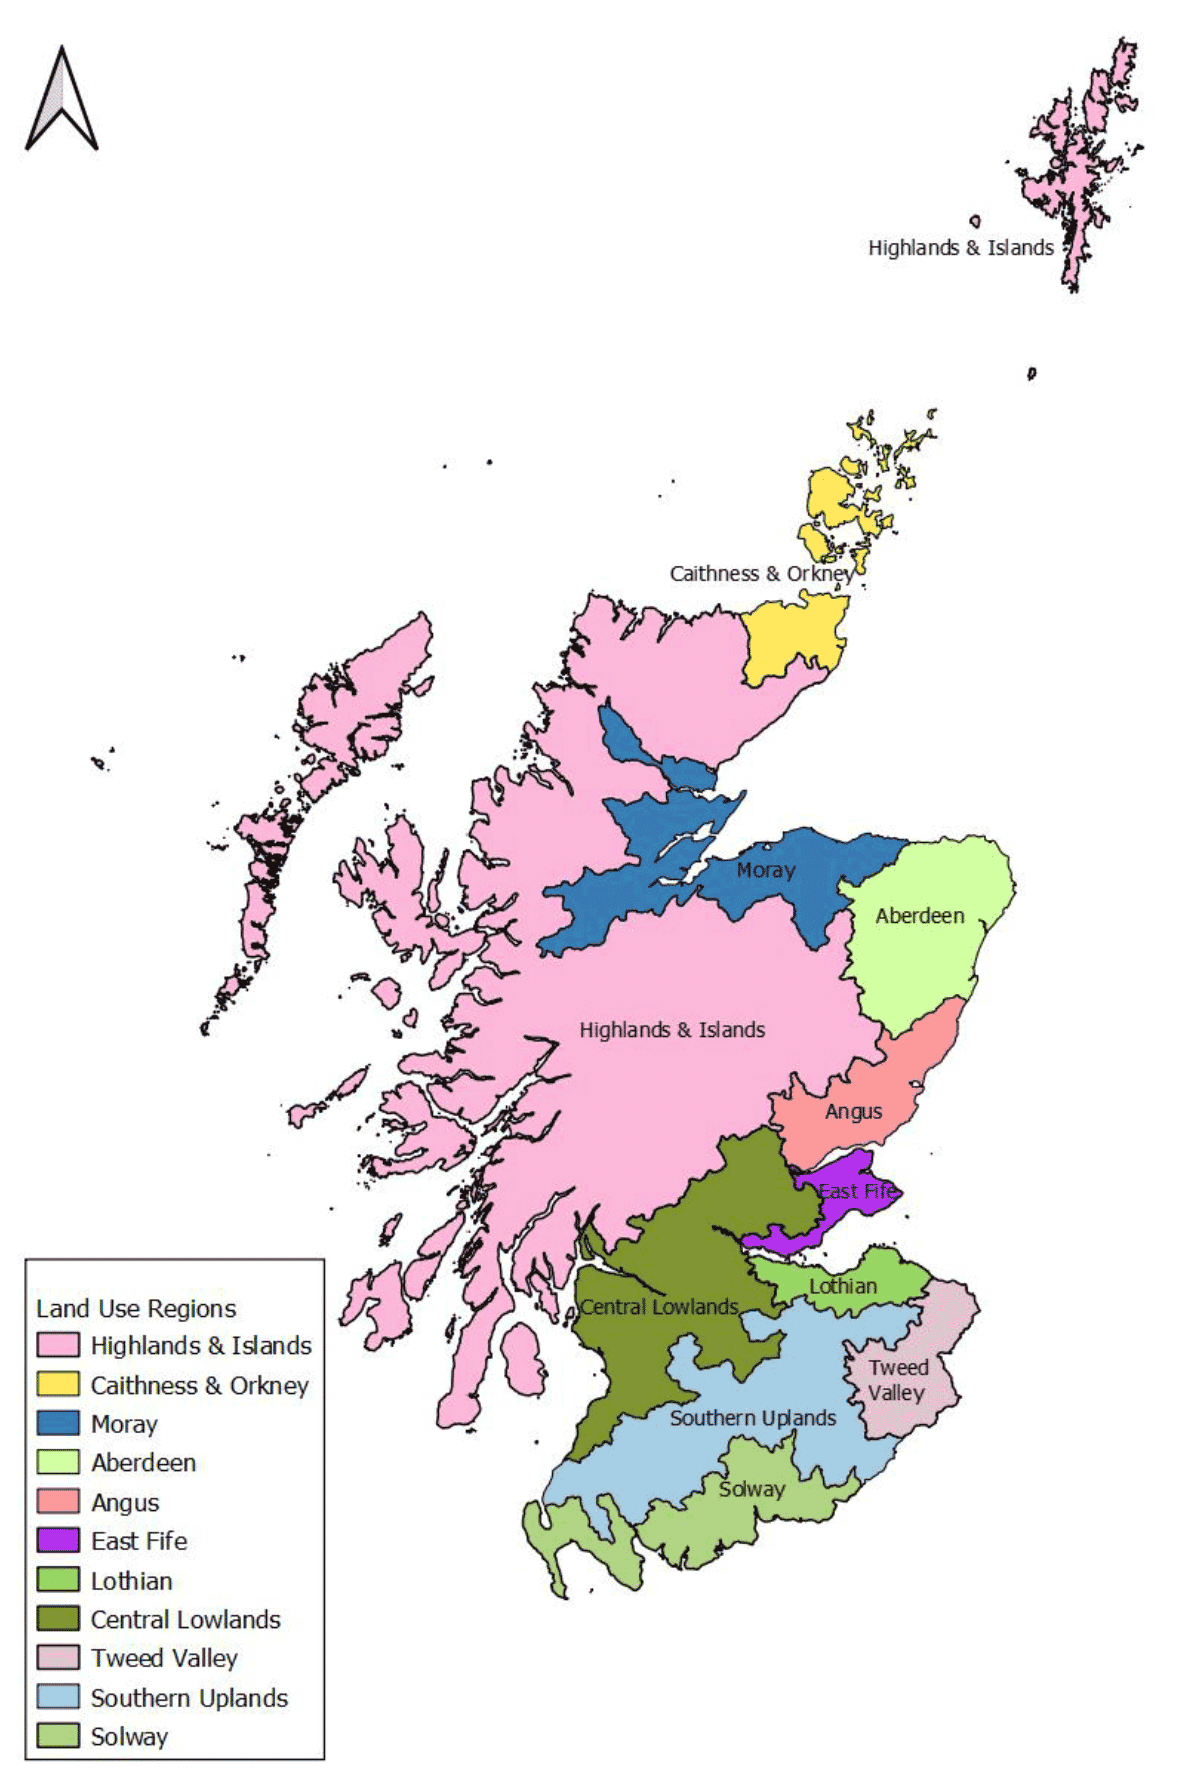 A map showing locations of the land use regions sampled.